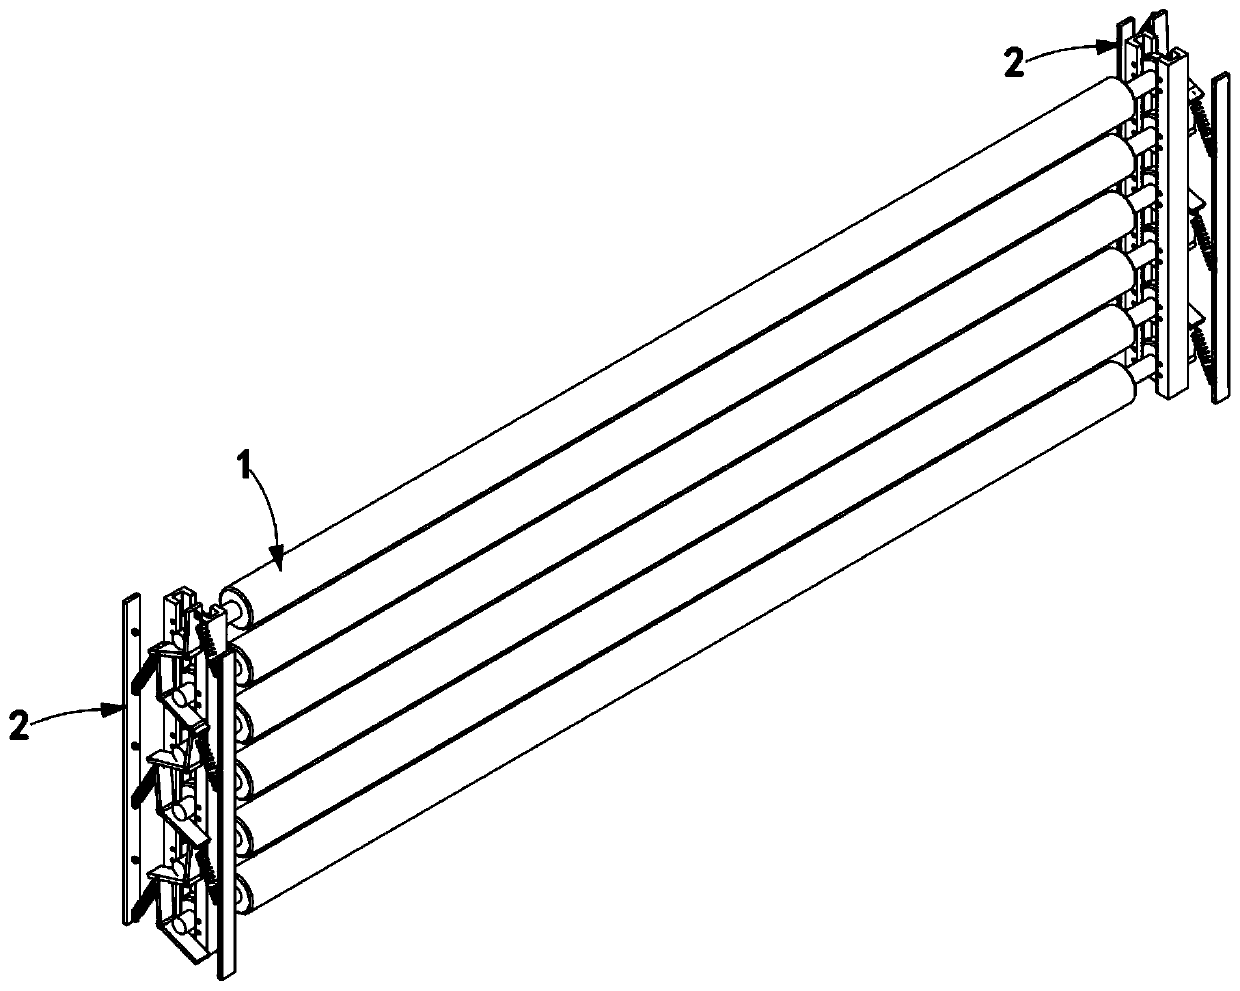 A strut spacing mechanism for air-drying and drying vermicelli